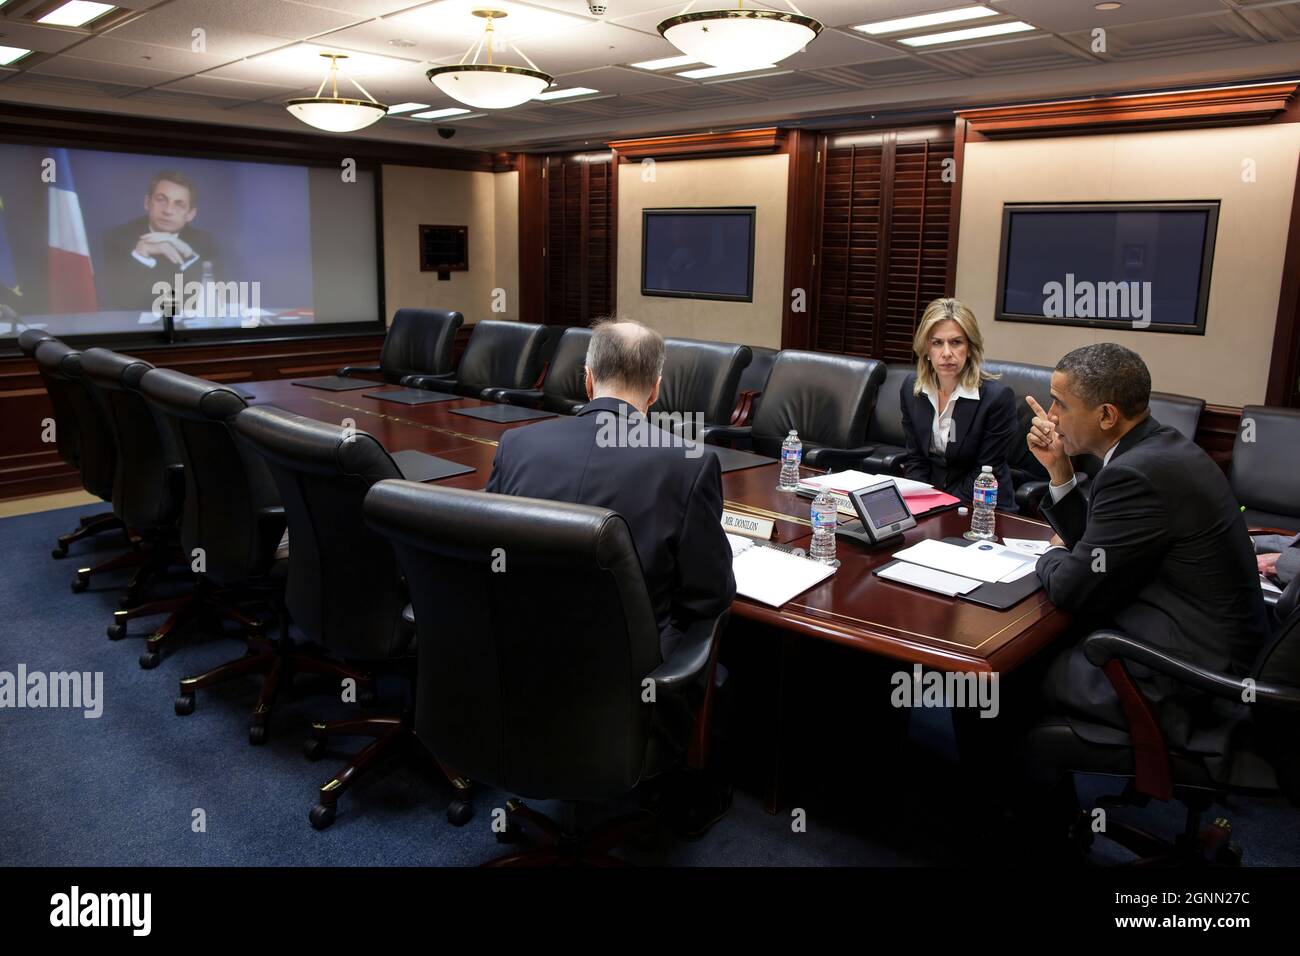 President Barack Obama participates in a video teleconference with President Nicolas Sarkozy of France, in the Situation Room of the White House, April 12, 2012. National Security Advisor Tom Donilon and Liz Sherwood-Randall, Special Assistant to the President and Senior Director for European Affairs, are seated with the President. (Official White House Photo by Pete Souza) This official White House photograph is being made available only for publication by news organizations and/or for personal use printing by the subject(s) of the photograph. The photograph may not be manipulated in any way Stock Photo